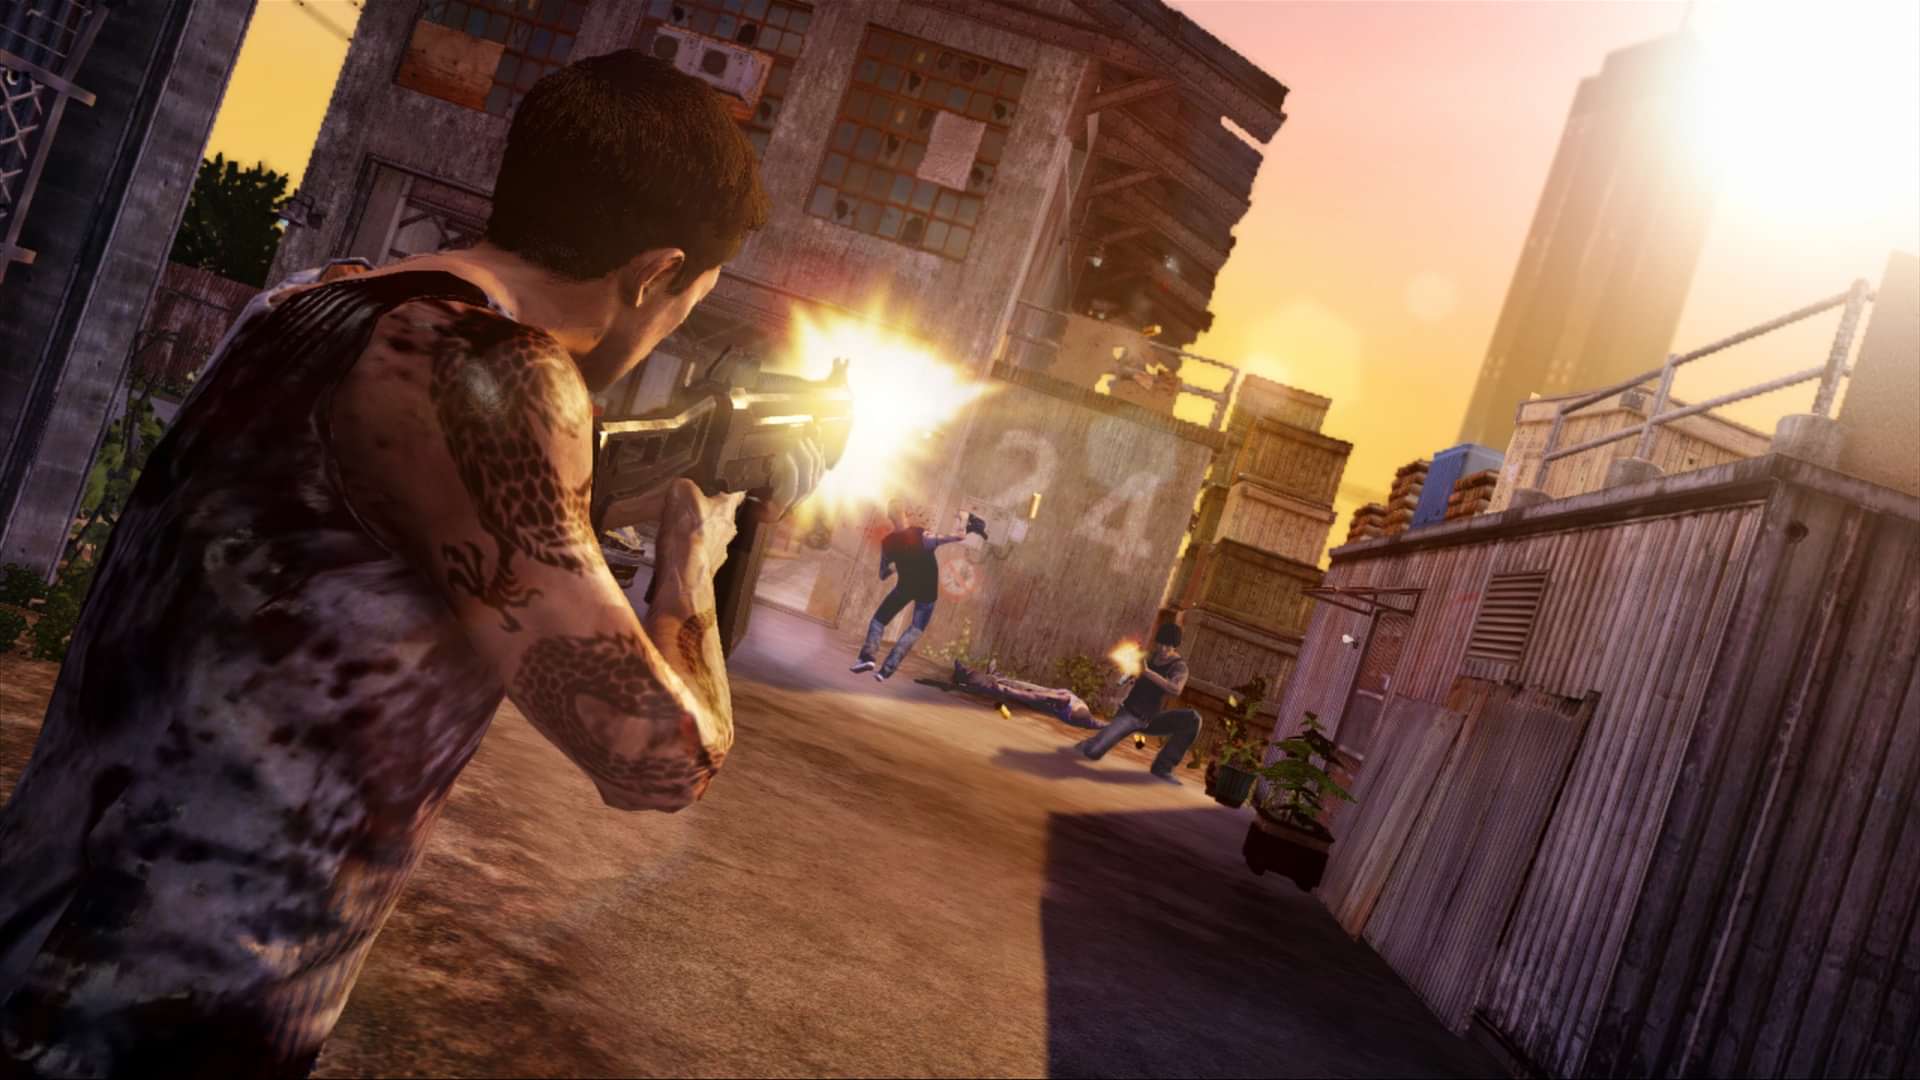 Saints Row review, Is the GTA 6 alternative worth playing?